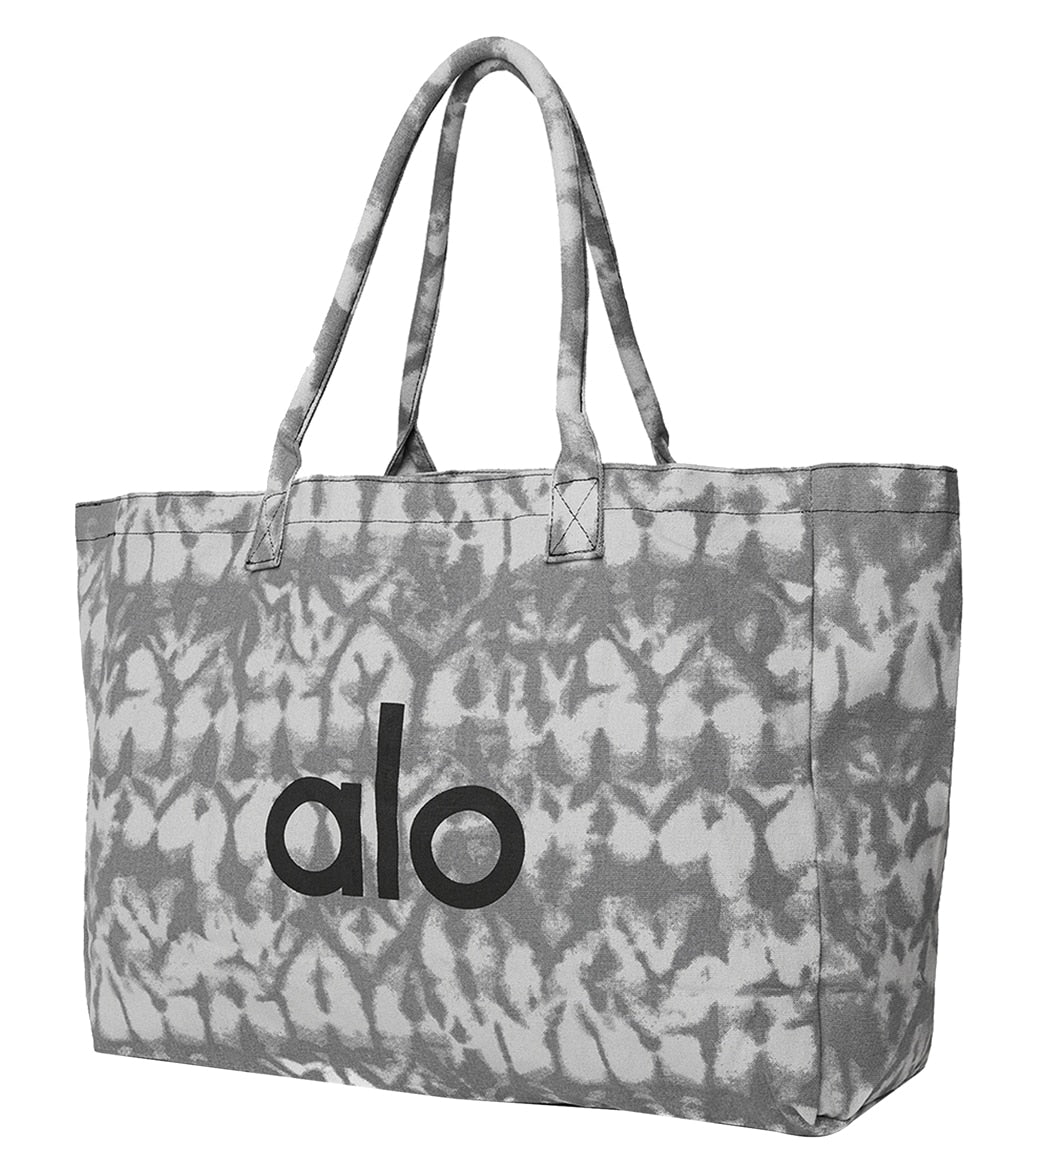 yoga tote bag products for sale